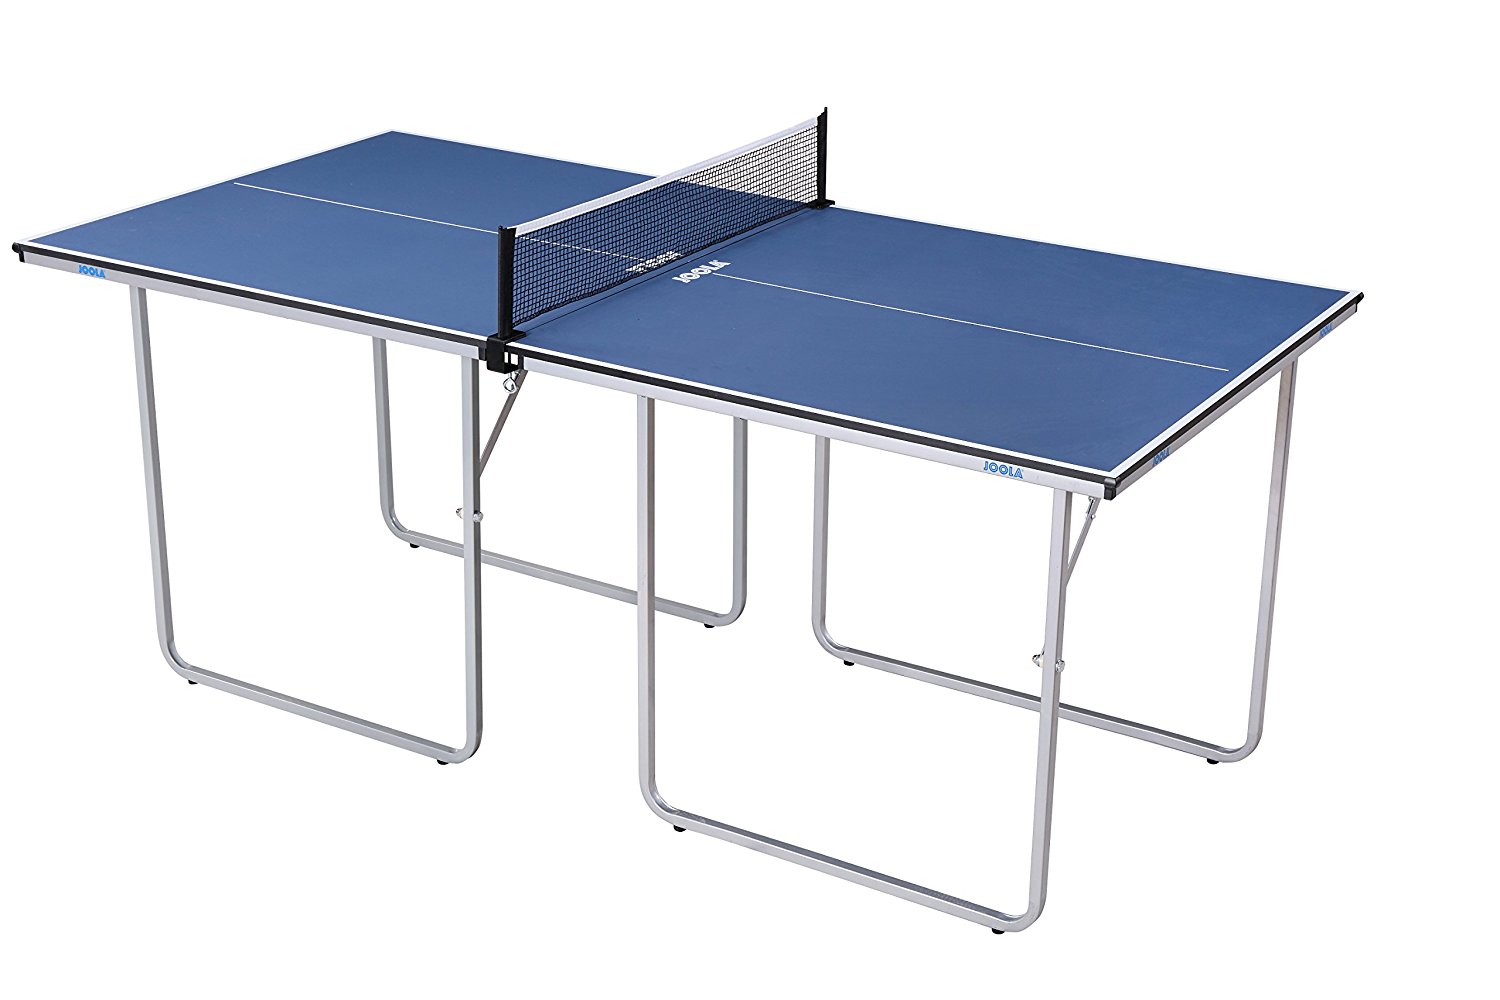 J﻿﻿OOLA Midsize Tennis and Ping Pong Table